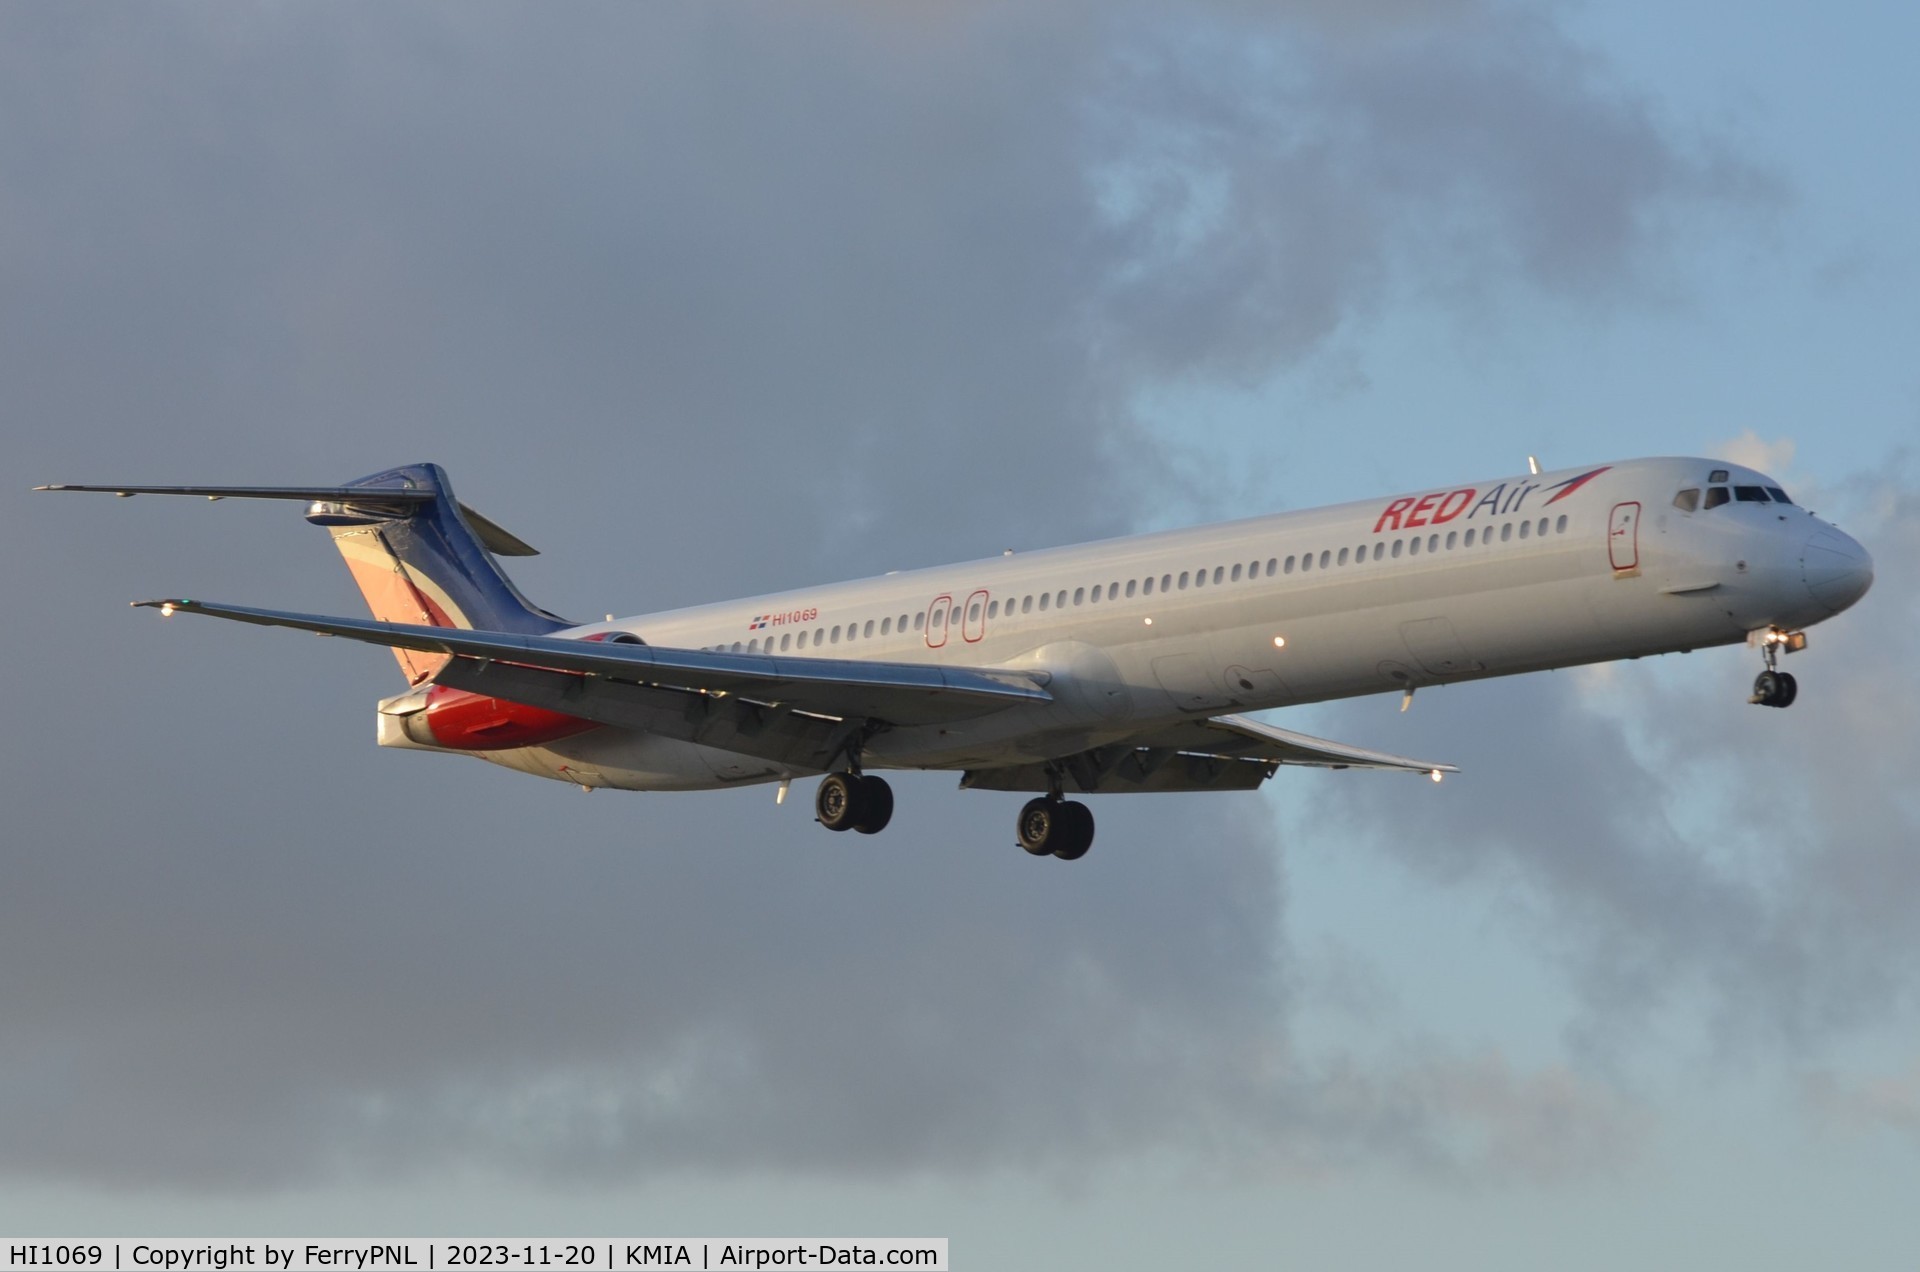 HI1069, 1988 McDonnell Douglas MD-82 (DC-9-82) C/N 49566, Red Air MD82 in the last sunrays of the day